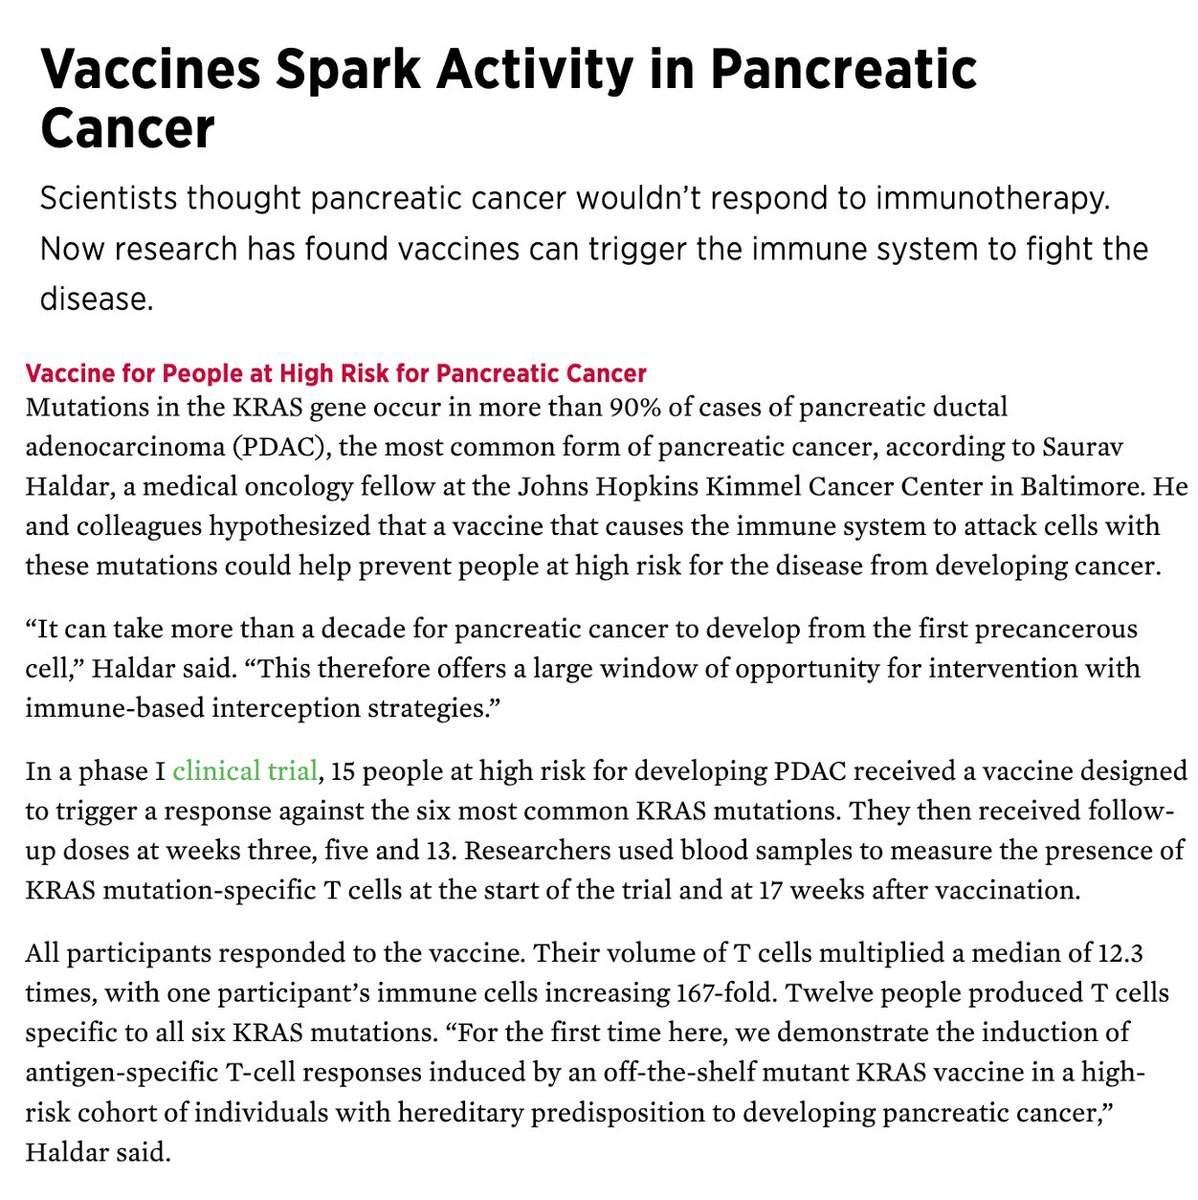 Are cancer vaccines ready for prime time? Highlights from our @hopkinskimmel study of an off-the-shelf mutant KRAS vaccine in individuals at high risk of developing pancreatic cancer are featured here #AACR24  
cancertodaymag.org/cancer-talk/va…